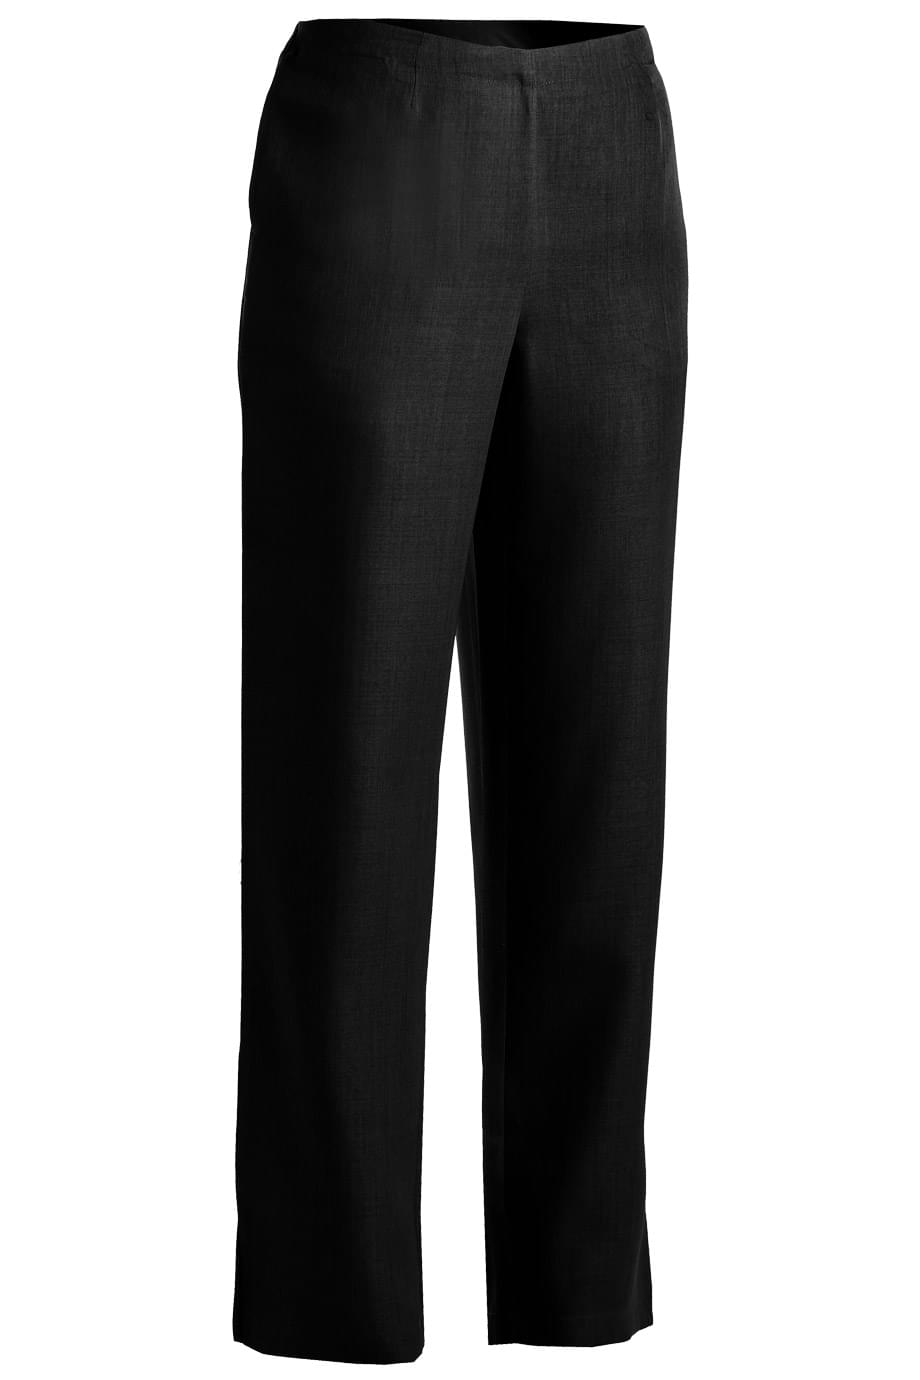 Moncler Ladies Black Wide-Leg Cropped Wool Trousers, Brand Size 38 (US Size  0) G20932A00012-54233-999 8053308920534 - Apparel - Jomashop